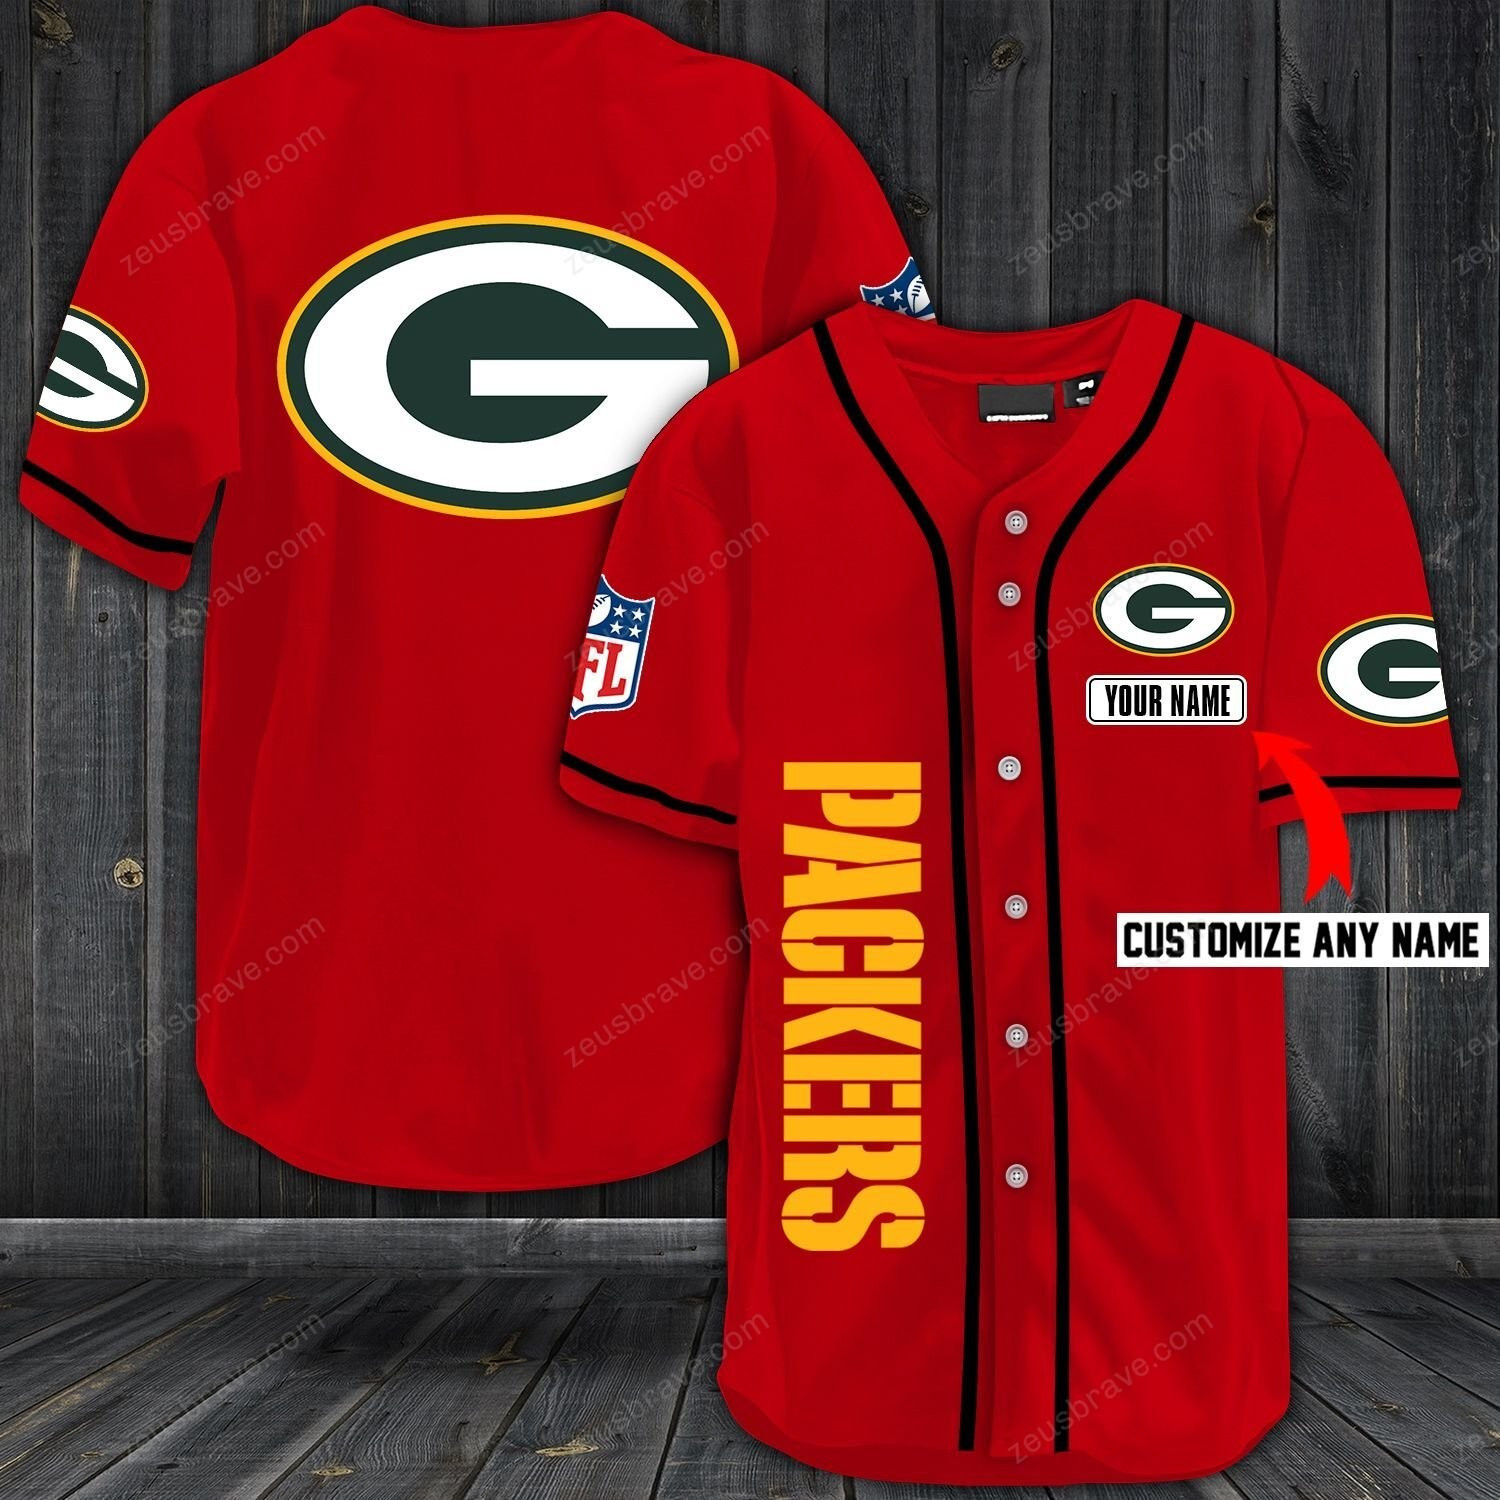 custom-name-nfl-green-bay-packers-baseball-jersey-for-fans-meteew